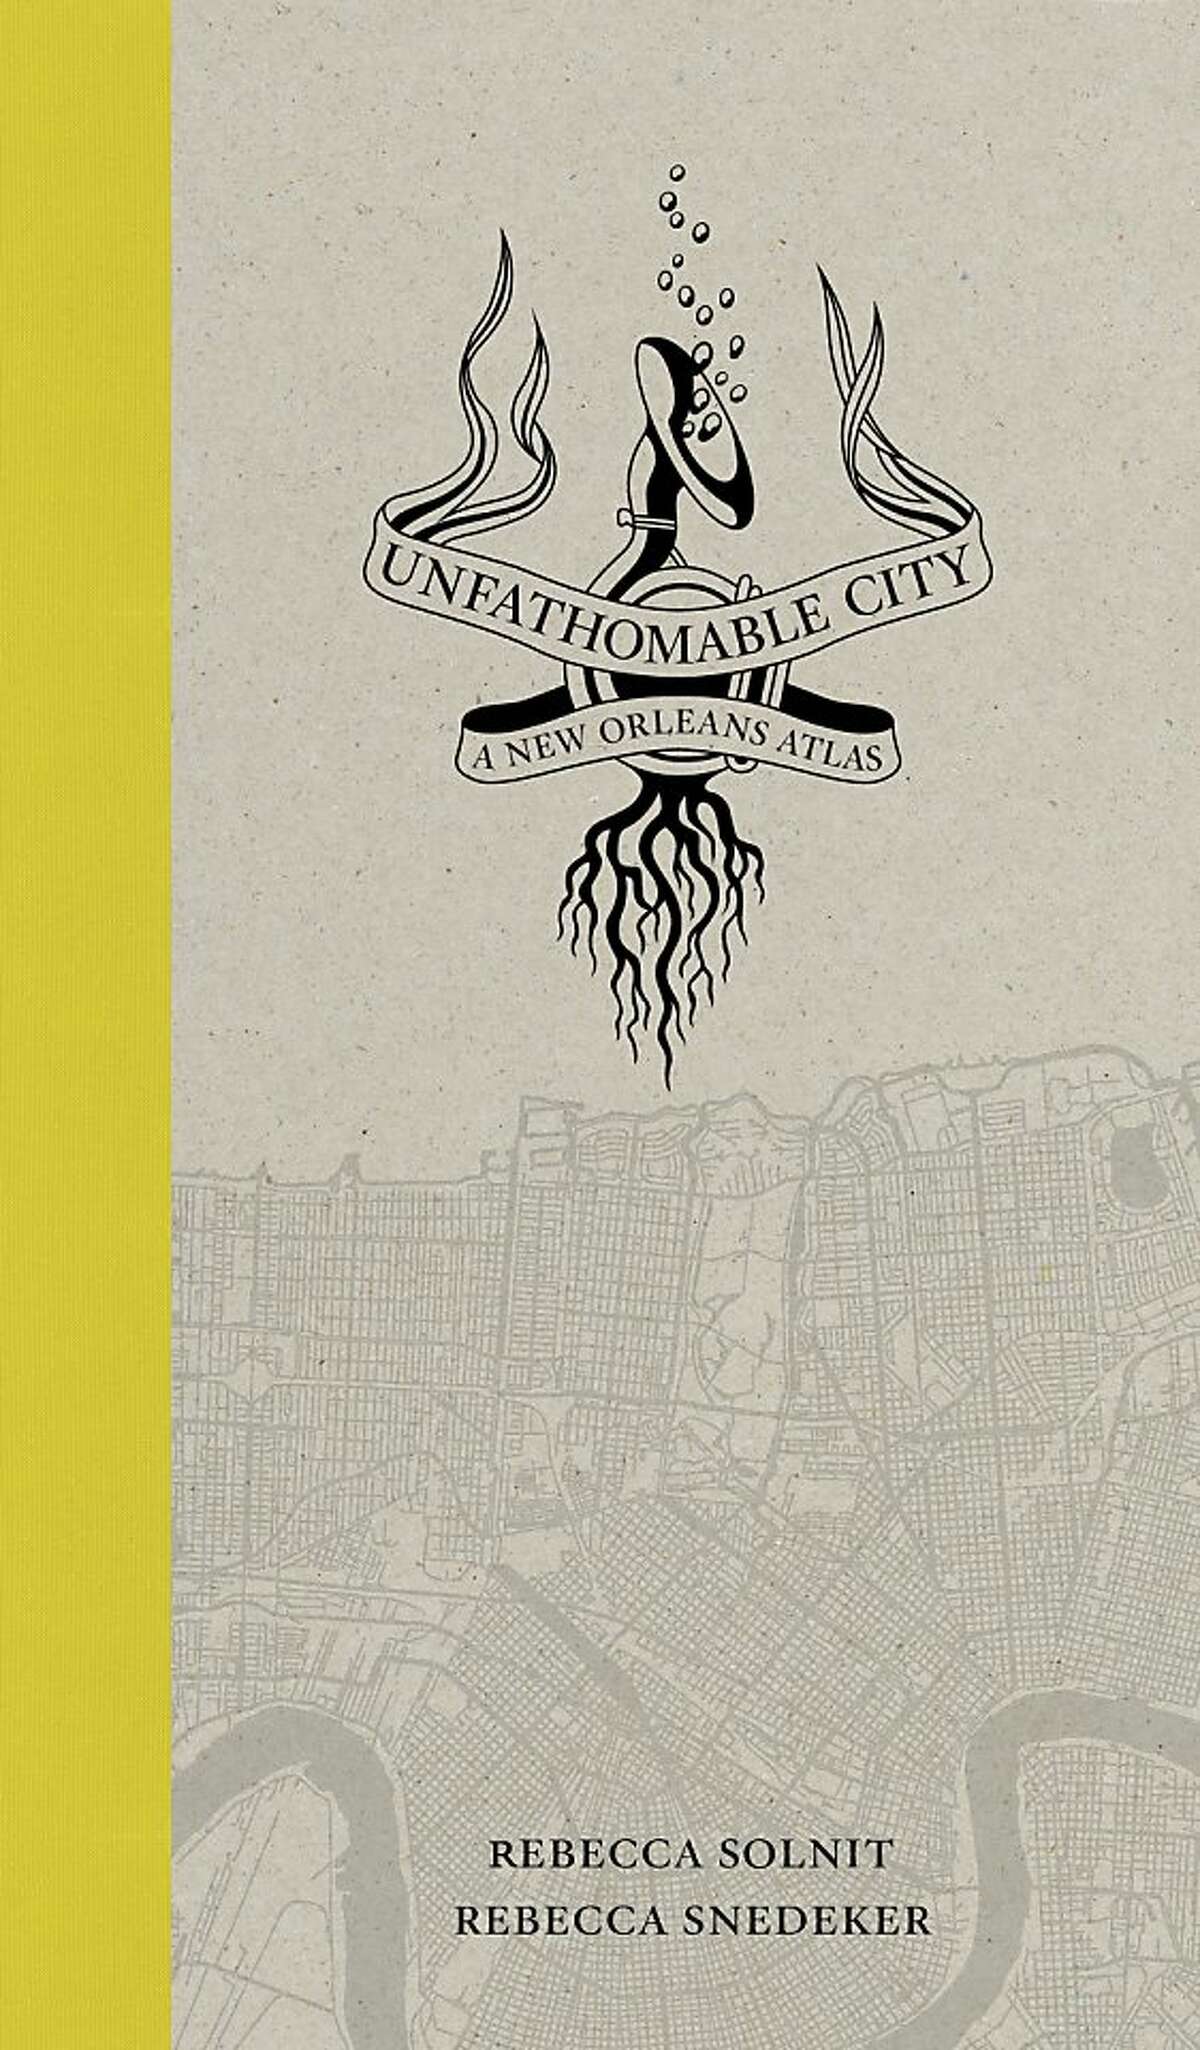 Unfathomable City: A New Orleans Atlas, by Rebecca Solnit and Rebecca Snedeker